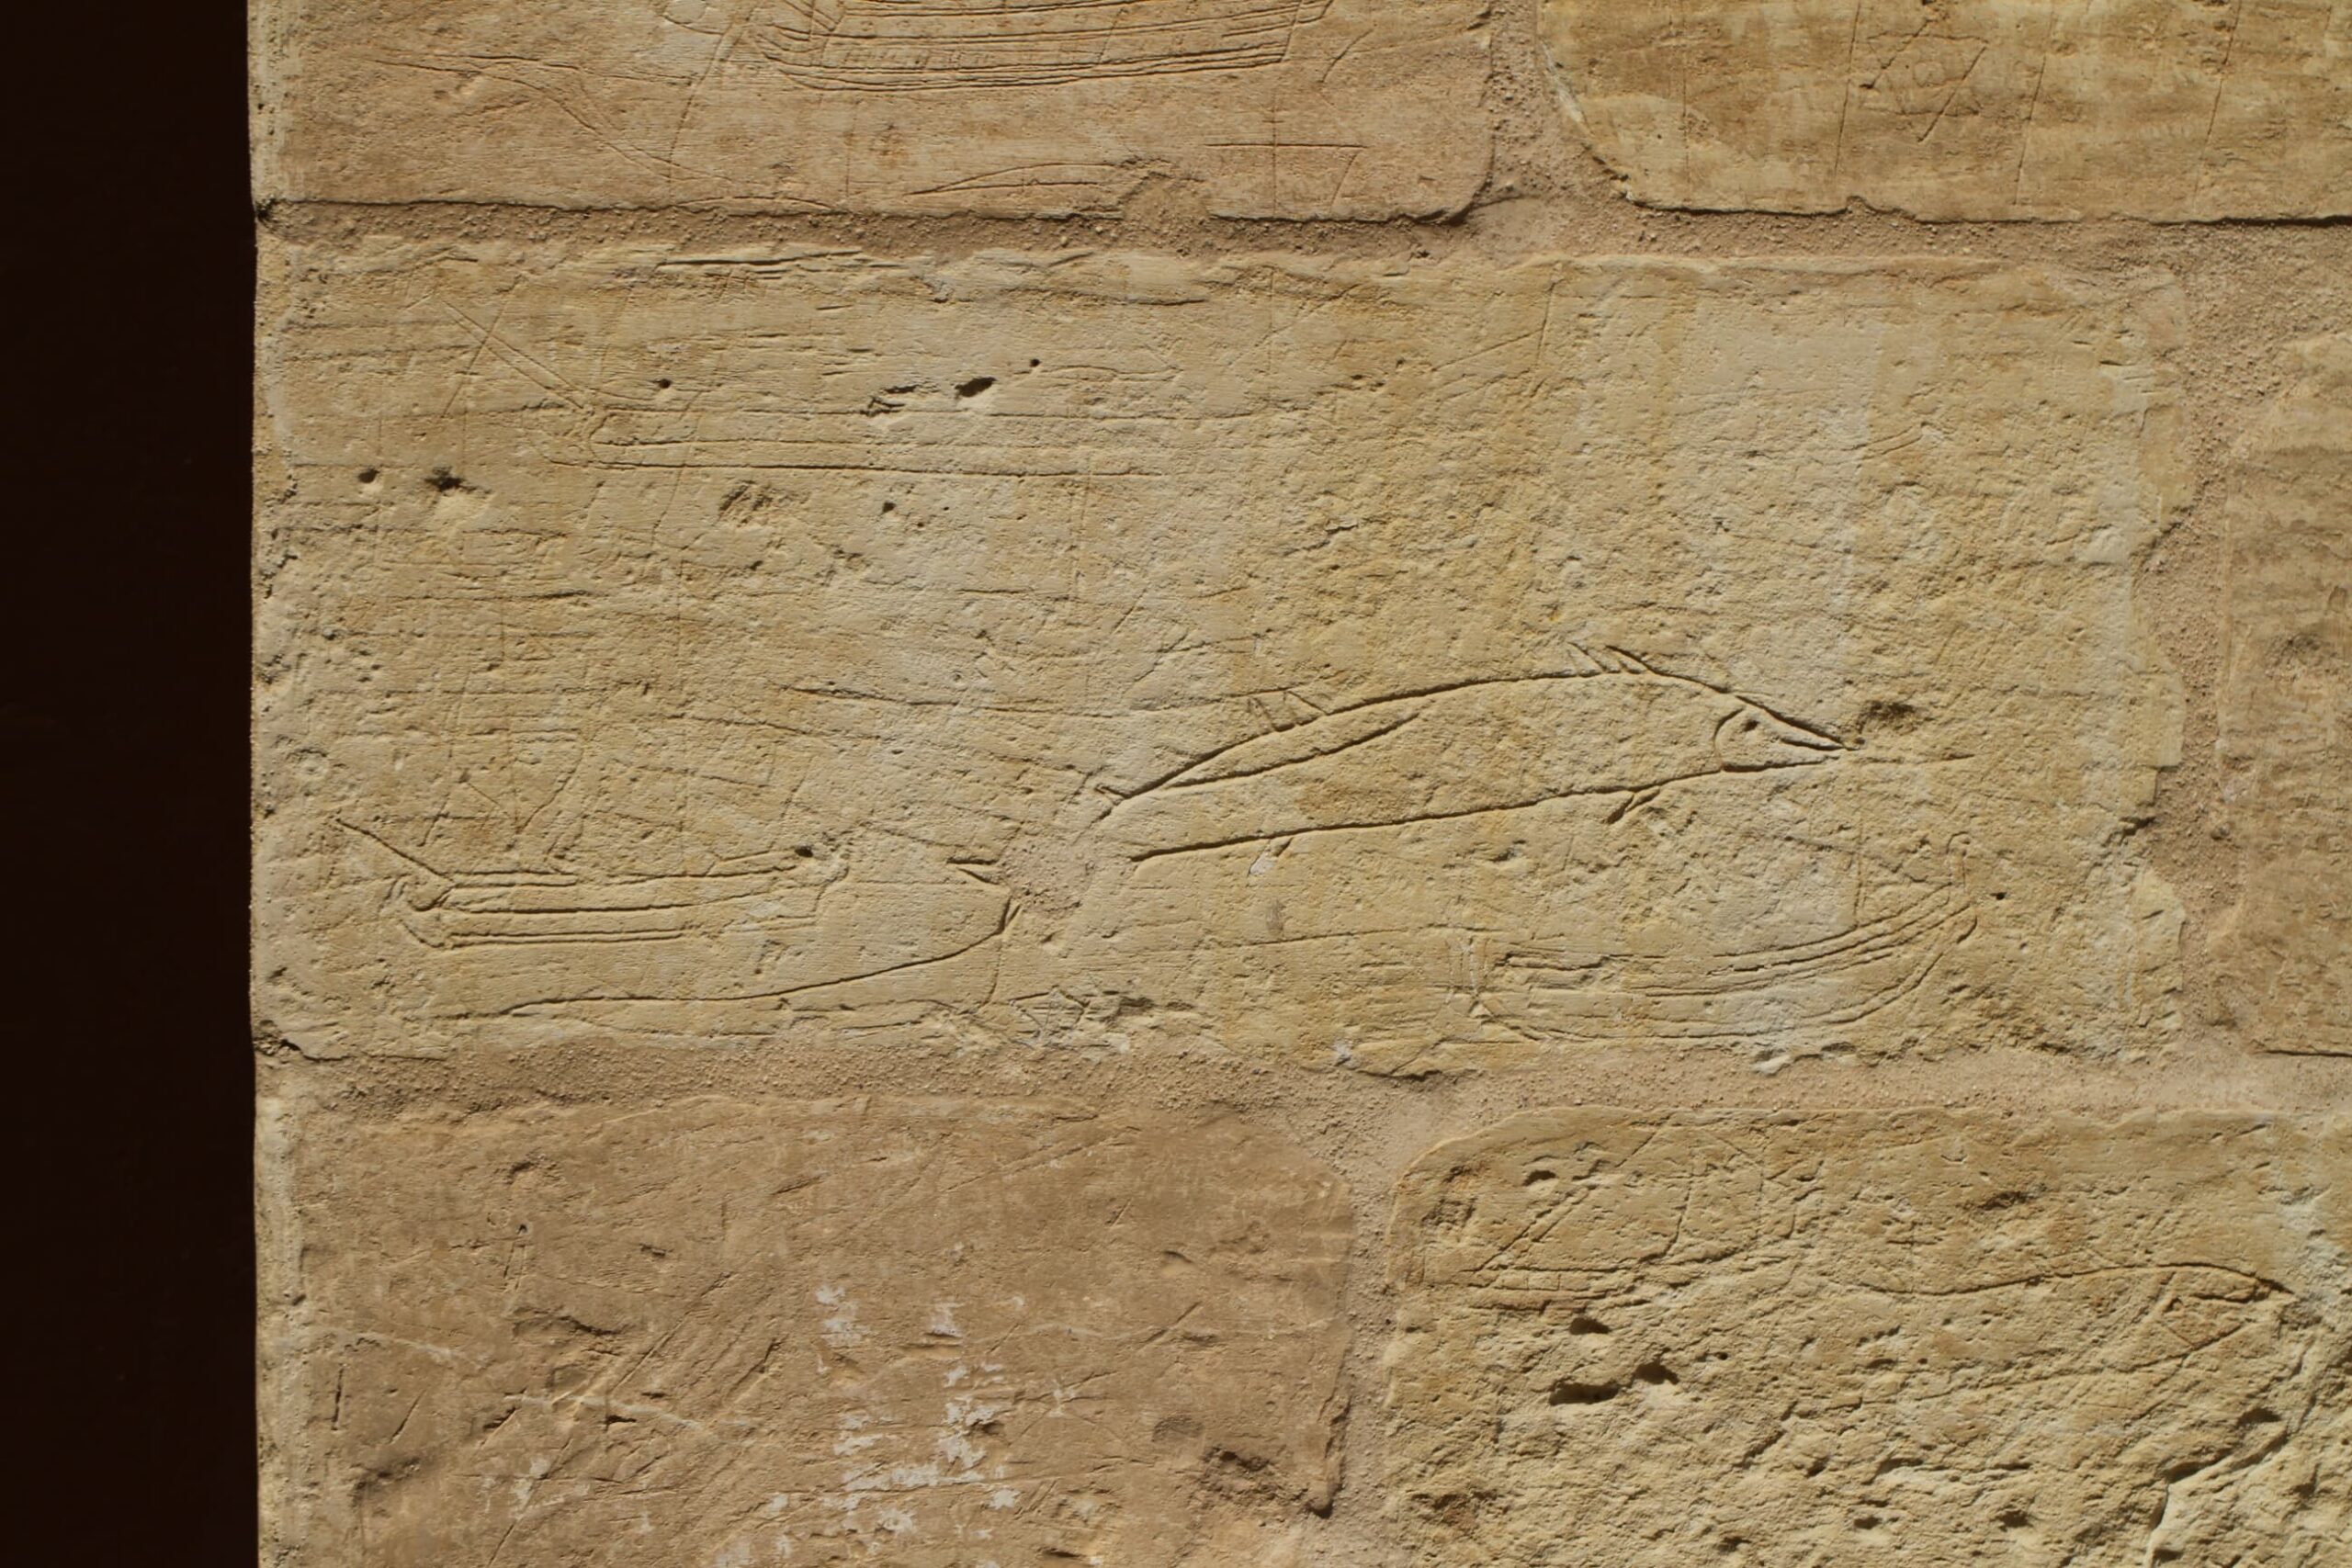 At least five individual ship graffiti can be seen, likely dating to the 18th century. Two fish are also etched alongside the ship graffiti.